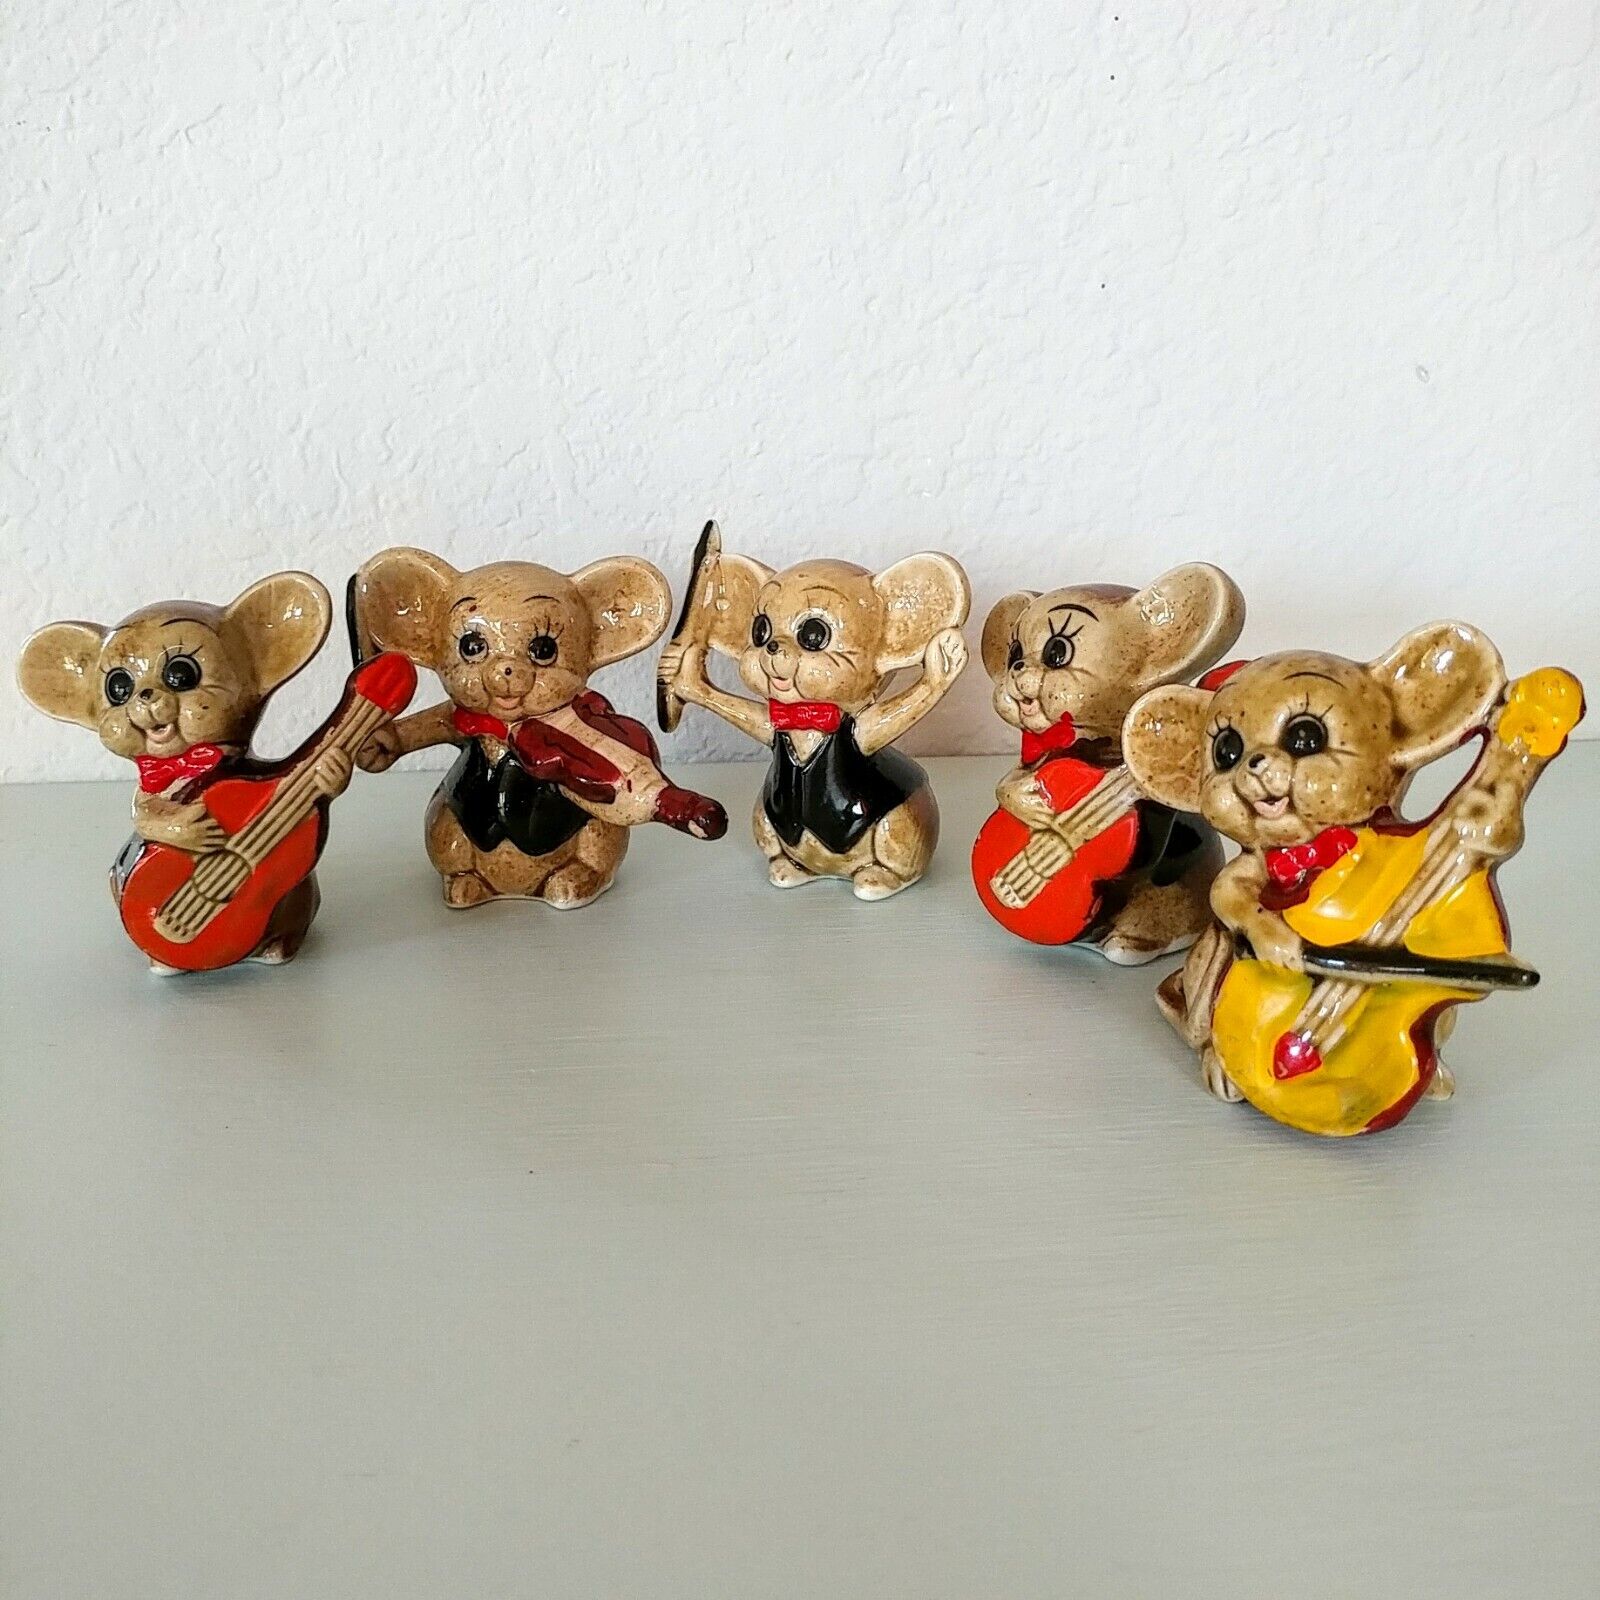 5 Vintage Ardco Mice Musicians Figurines Guitar Bass Violin Collectible Mouse 